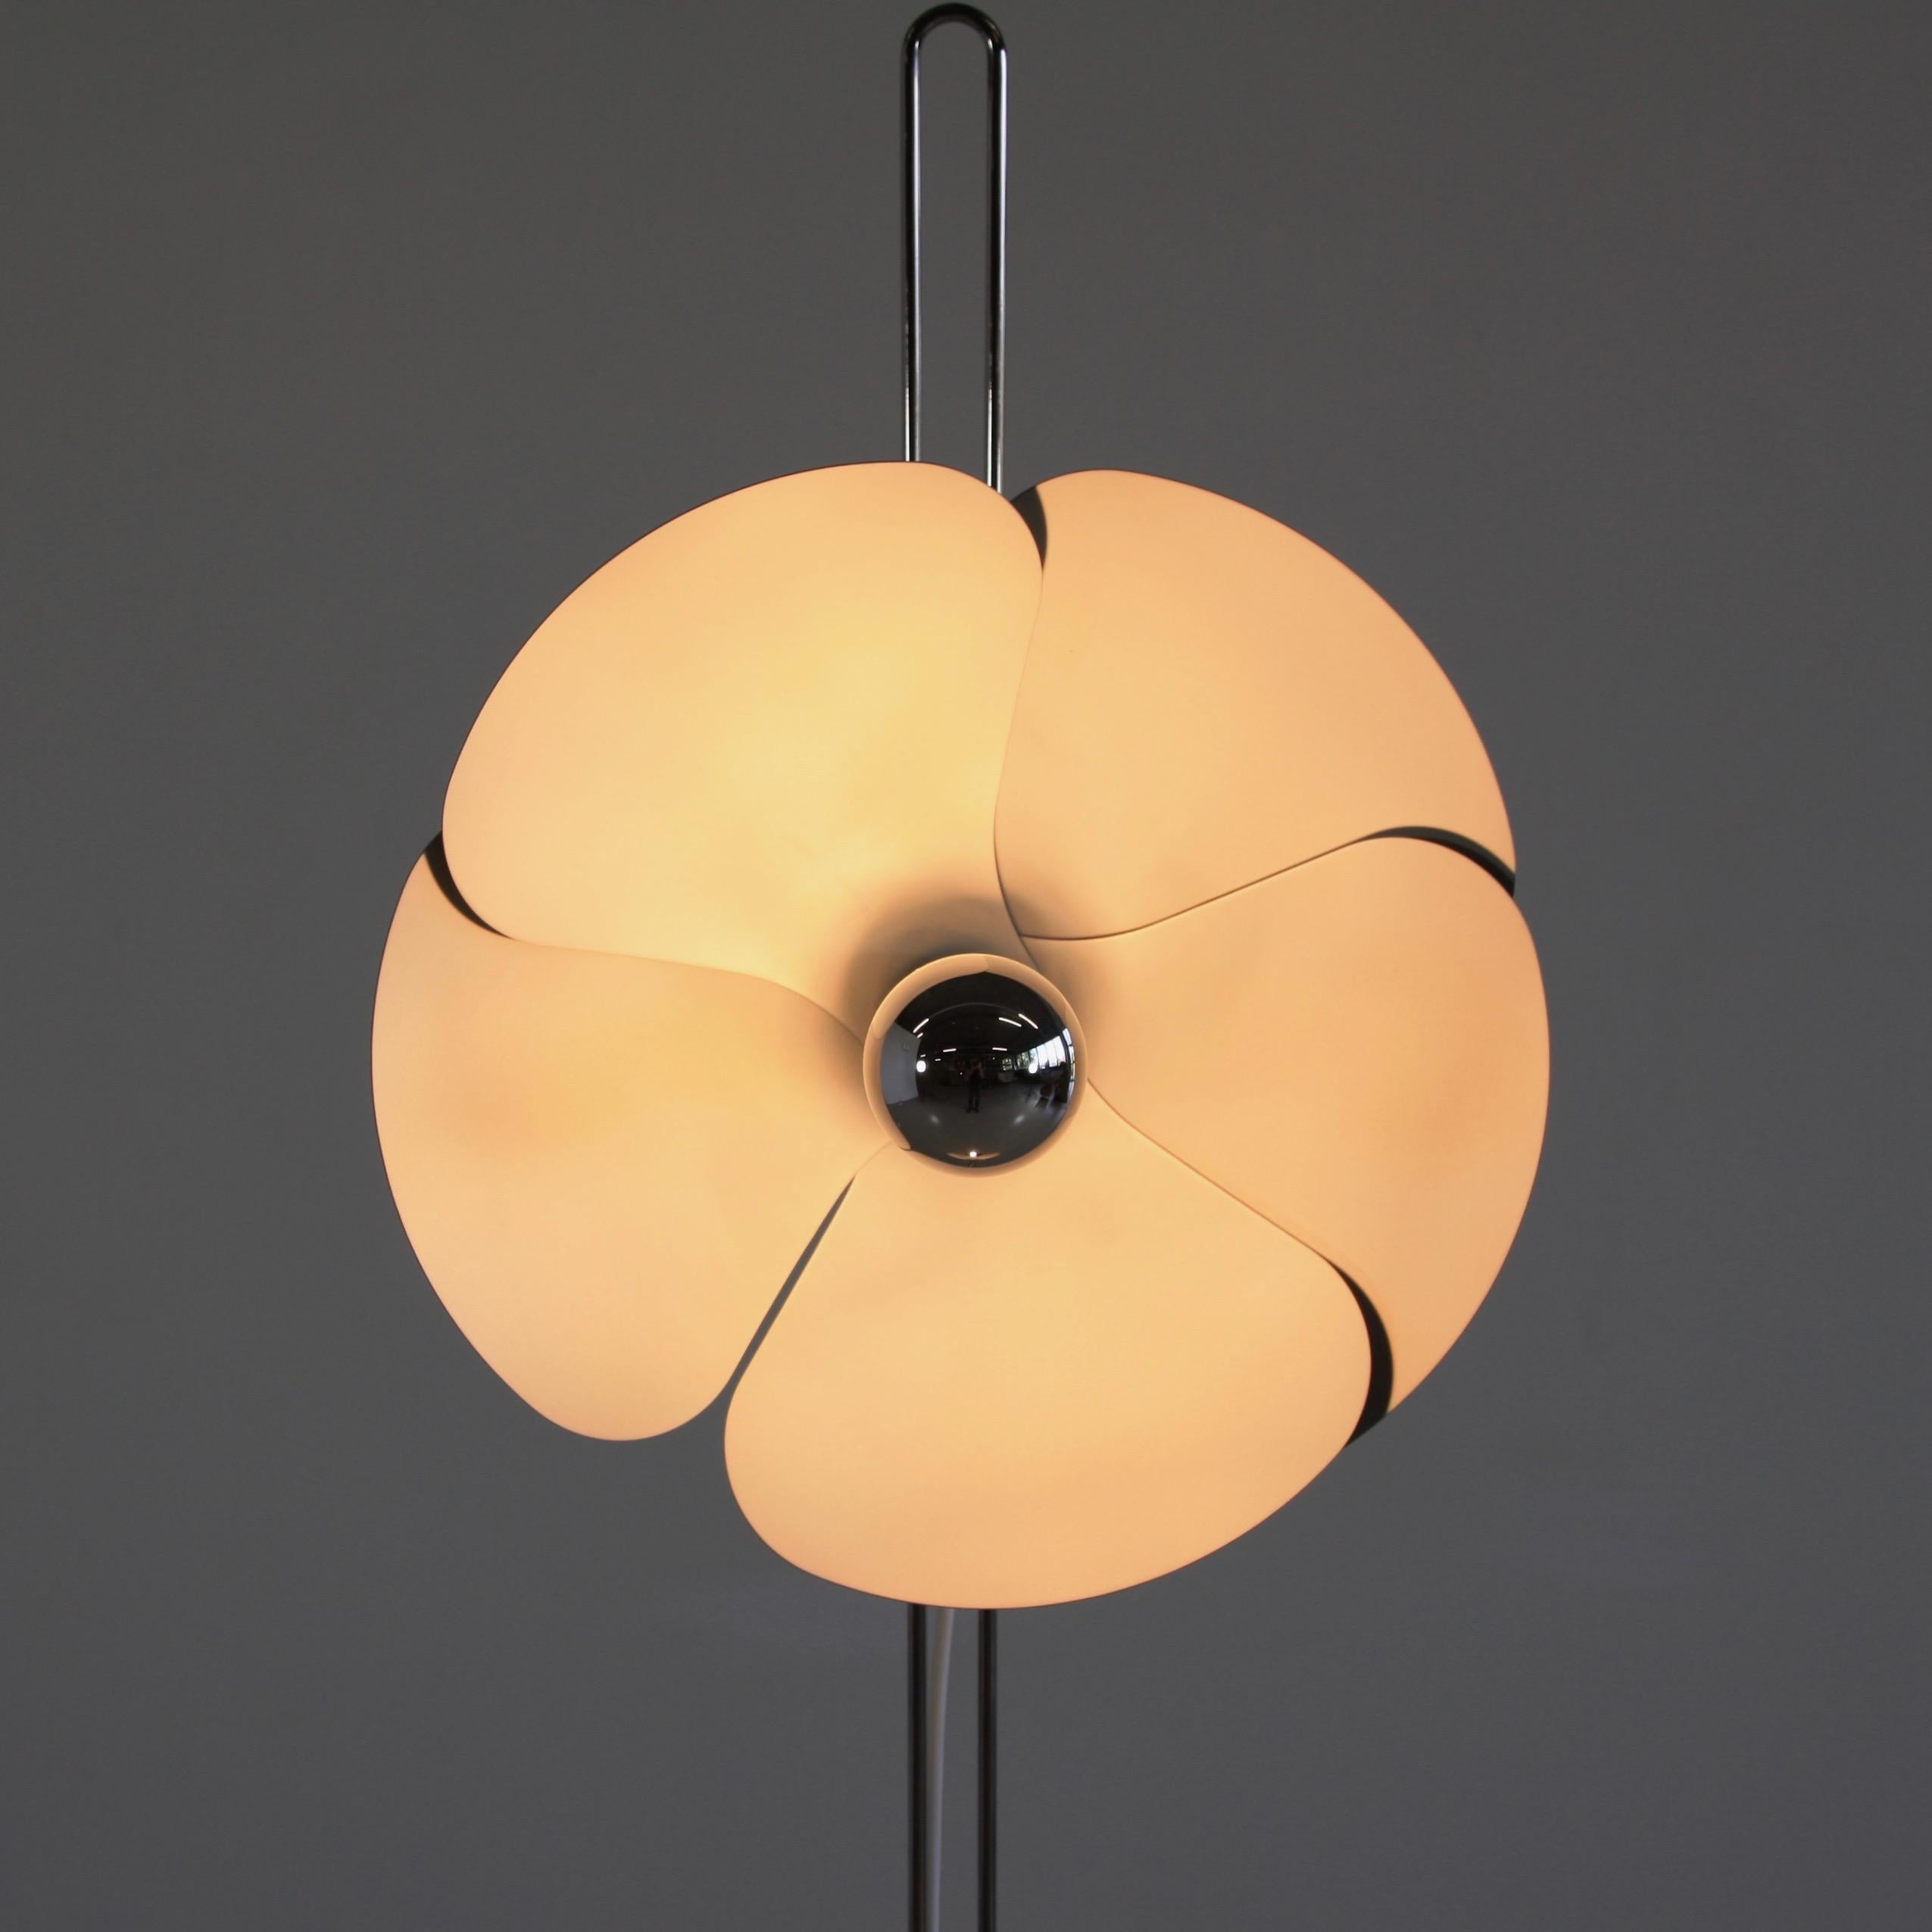 Floor lamp designed by Olivier Mourgue. France, Disderot, 1967.

Model 2093 with two swivelling reflectors. Chromed metal base and stem, brushed aluminium reflectors. An elegant model with two reflectors.

Reference: Krzentowski, Clemence &